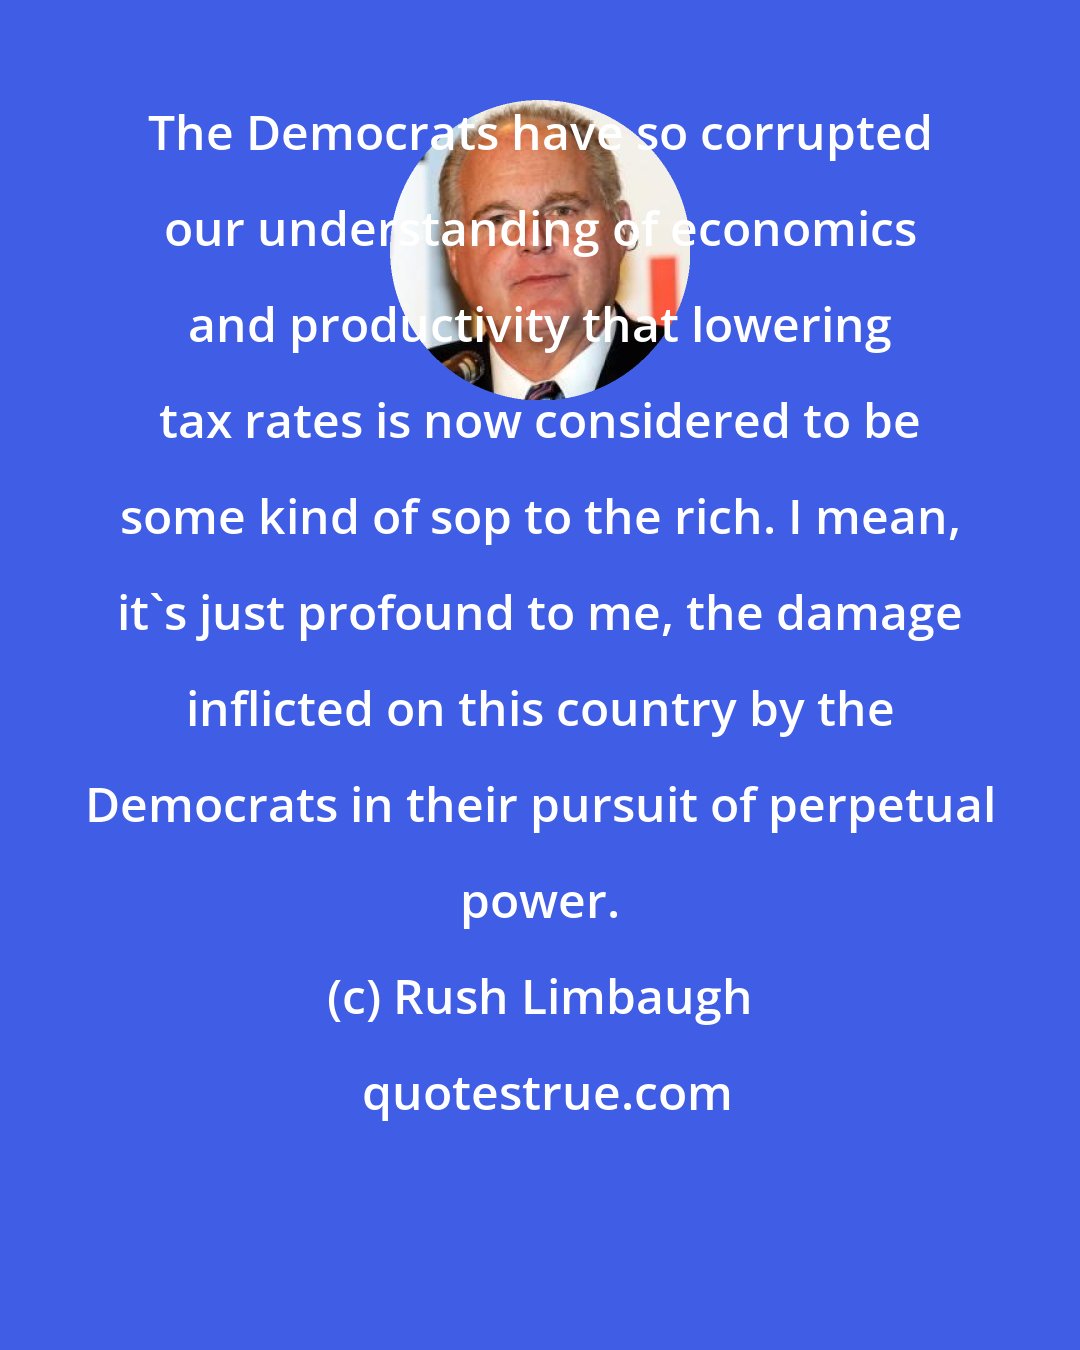 Rush Limbaugh: The Democrats have so corrupted our understanding of economics and productivity that lowering tax rates is now considered to be some kind of sop to the rich. I mean, it's just profound to me, the damage inflicted on this country by the Democrats in their pursuit of perpetual power.